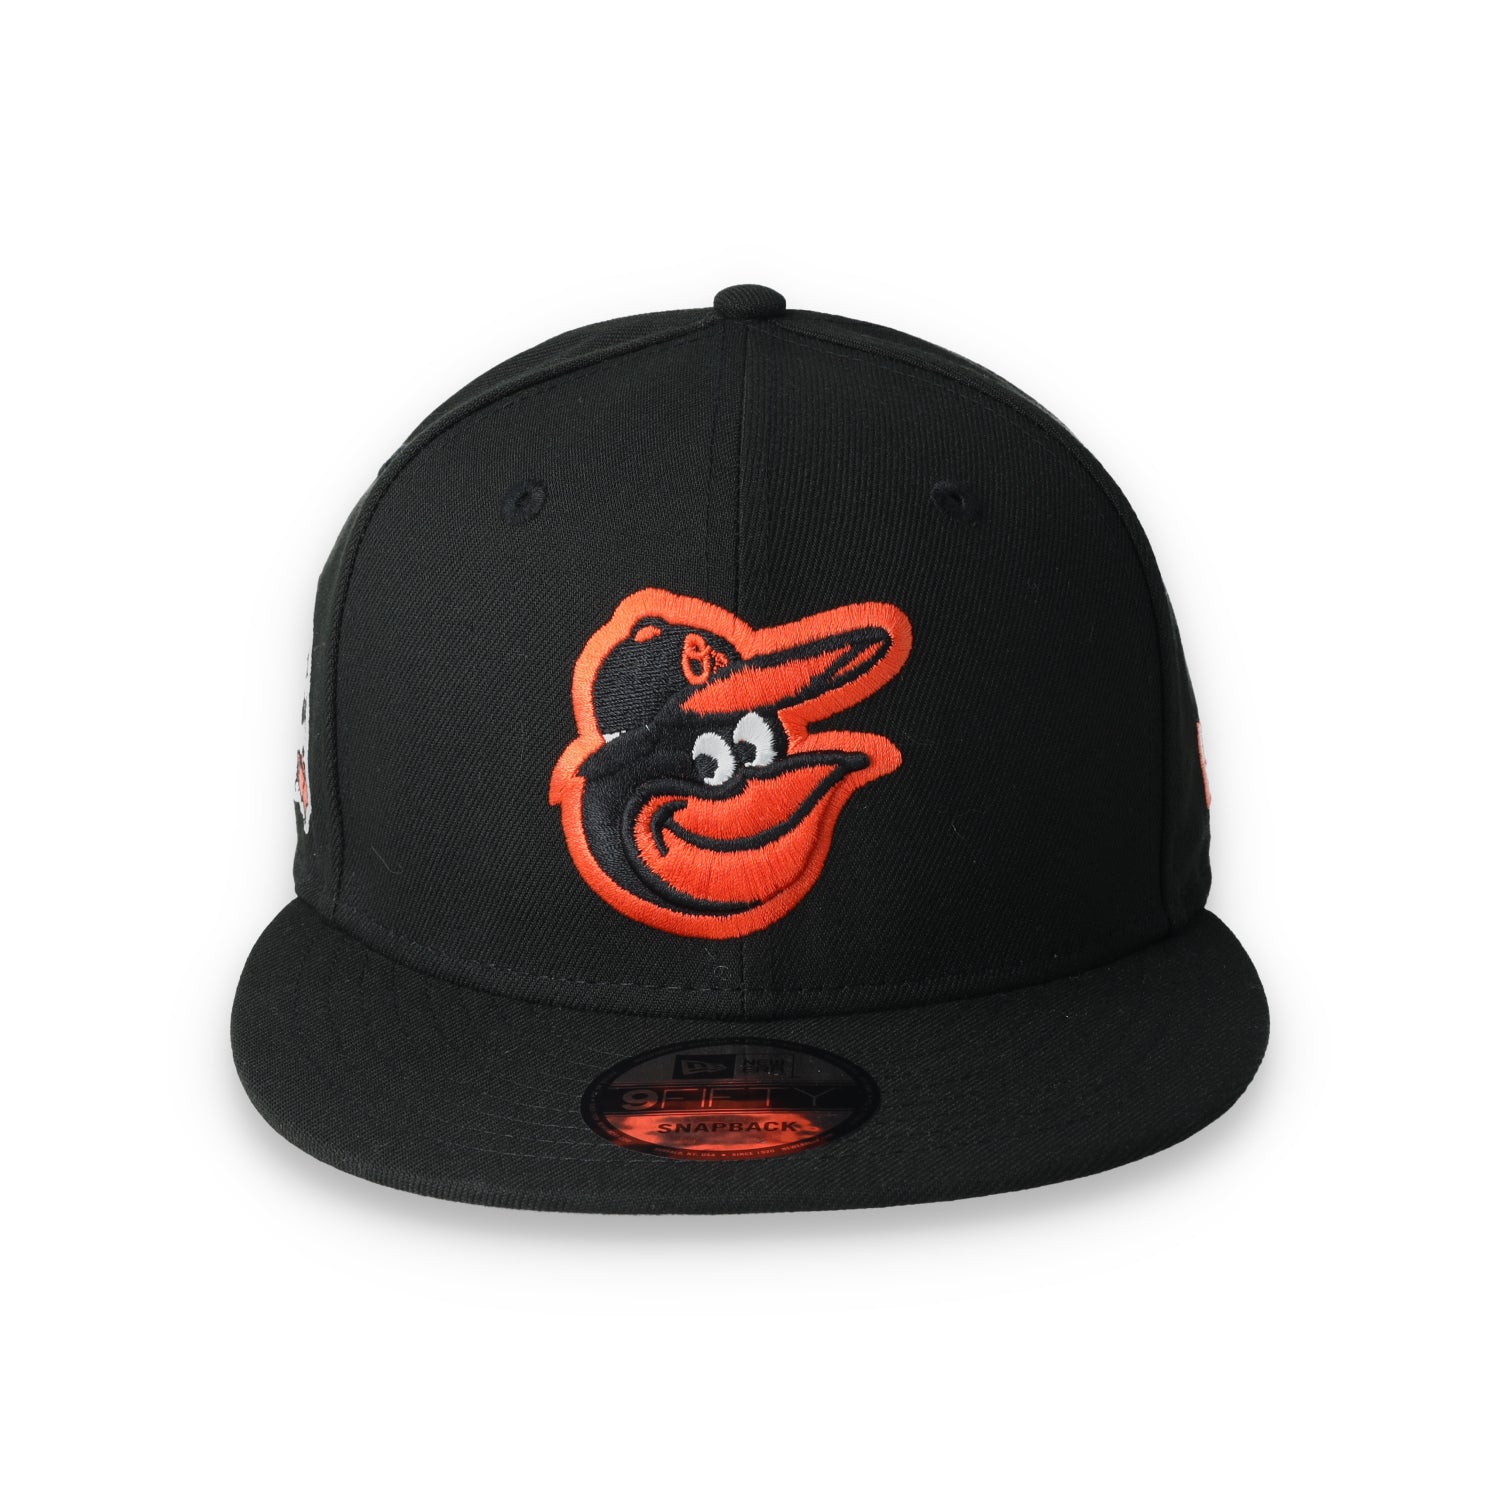 New Era Baltimore Orioles Patch E3 9FIFTY Snapback Hat